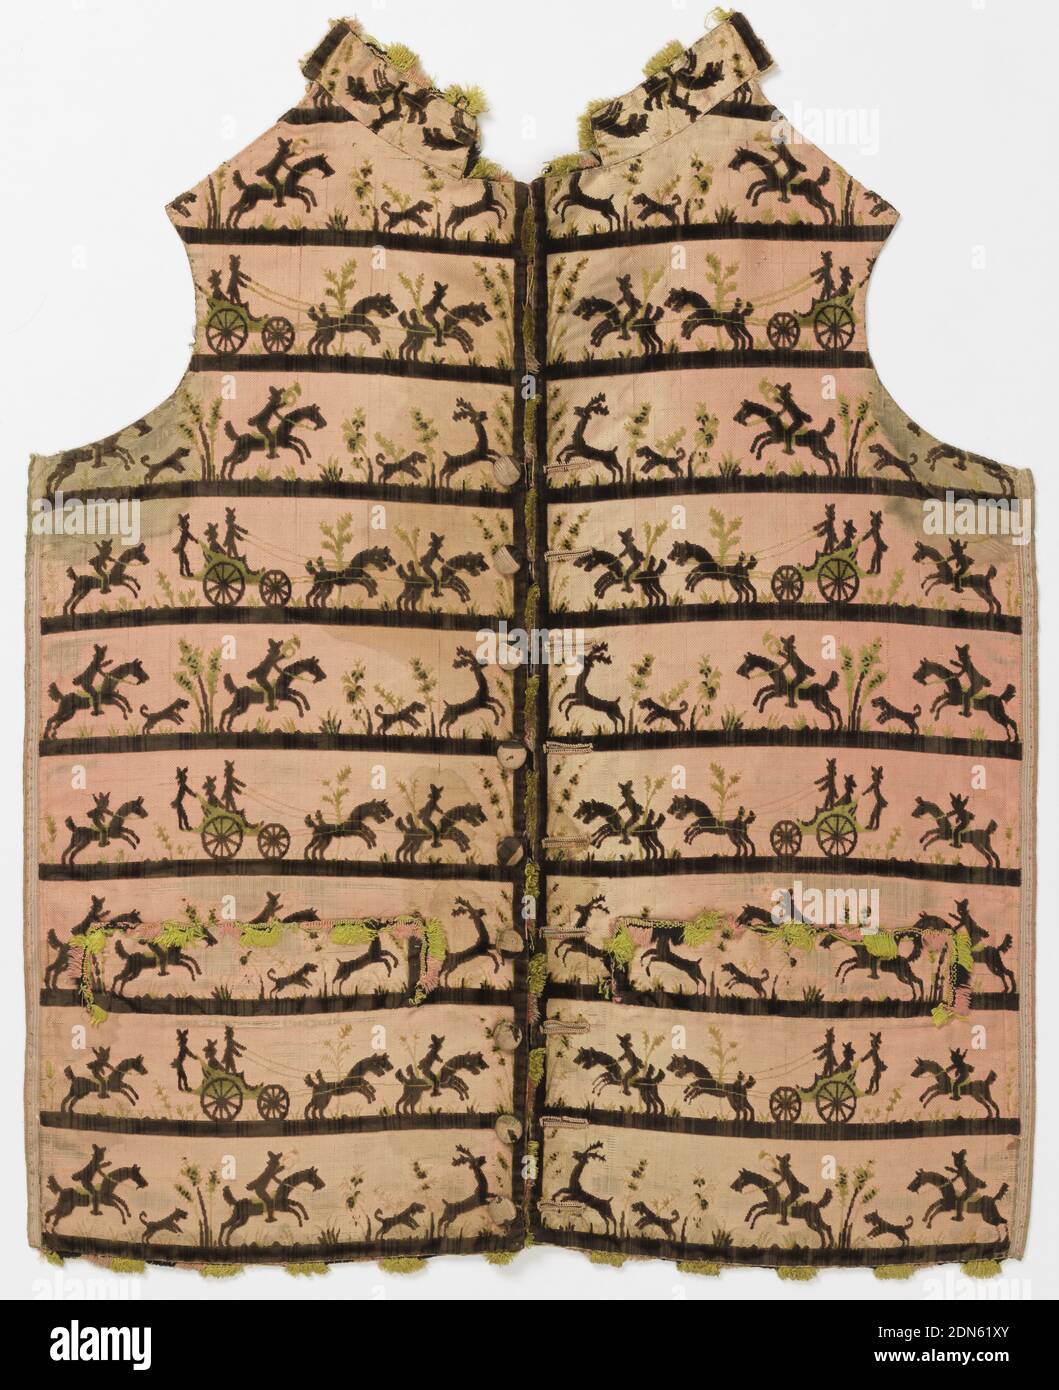 Waistcoat, Medium: silk Technique: cut voided supplementary warp pile in a twill foundation, Waistcoat of pale pink velvet with black horizontal stripes has alternating rows of hunting scenes. One row has two men on horseback, one with a French horn, with hunting dogs in pursuit of a deer. The other has a carriage drawn by four horses followed by another man on horseback. Decorated with pink and yellow-green fringe., France or Spain, ca. 1790, costume & accessories, Waistcoat Stock Photo